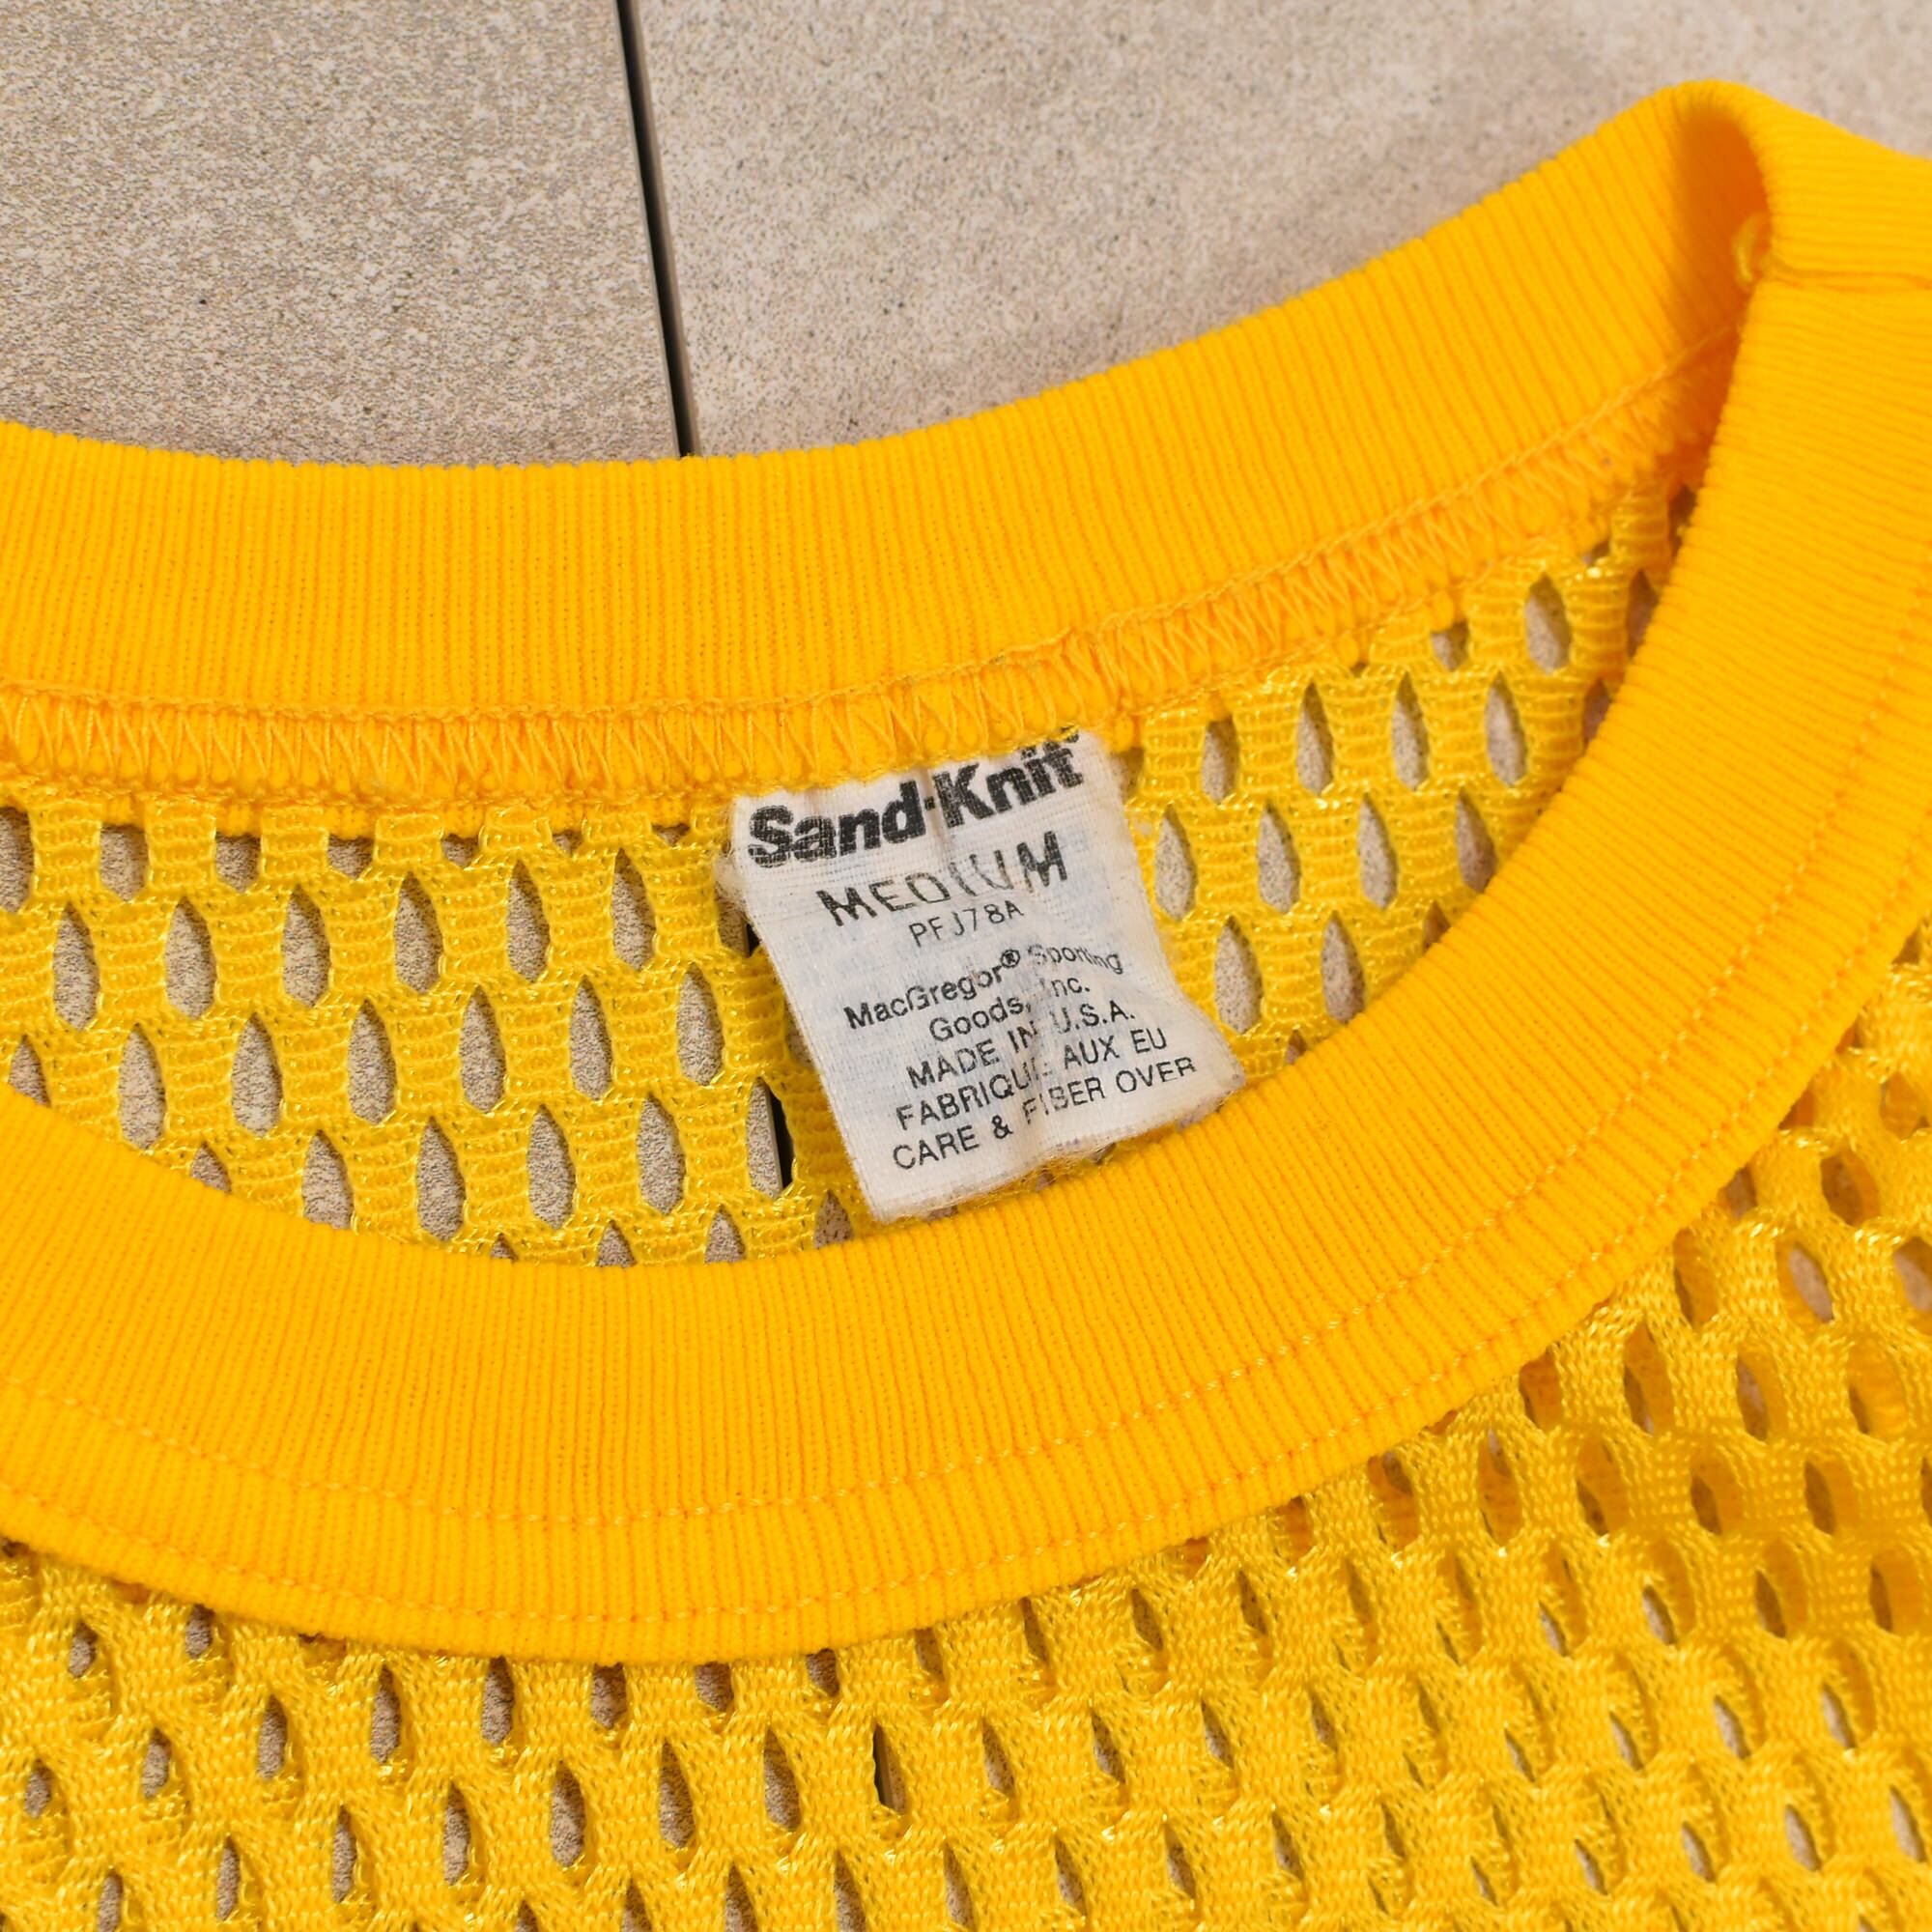 90s made in France border knit sweater